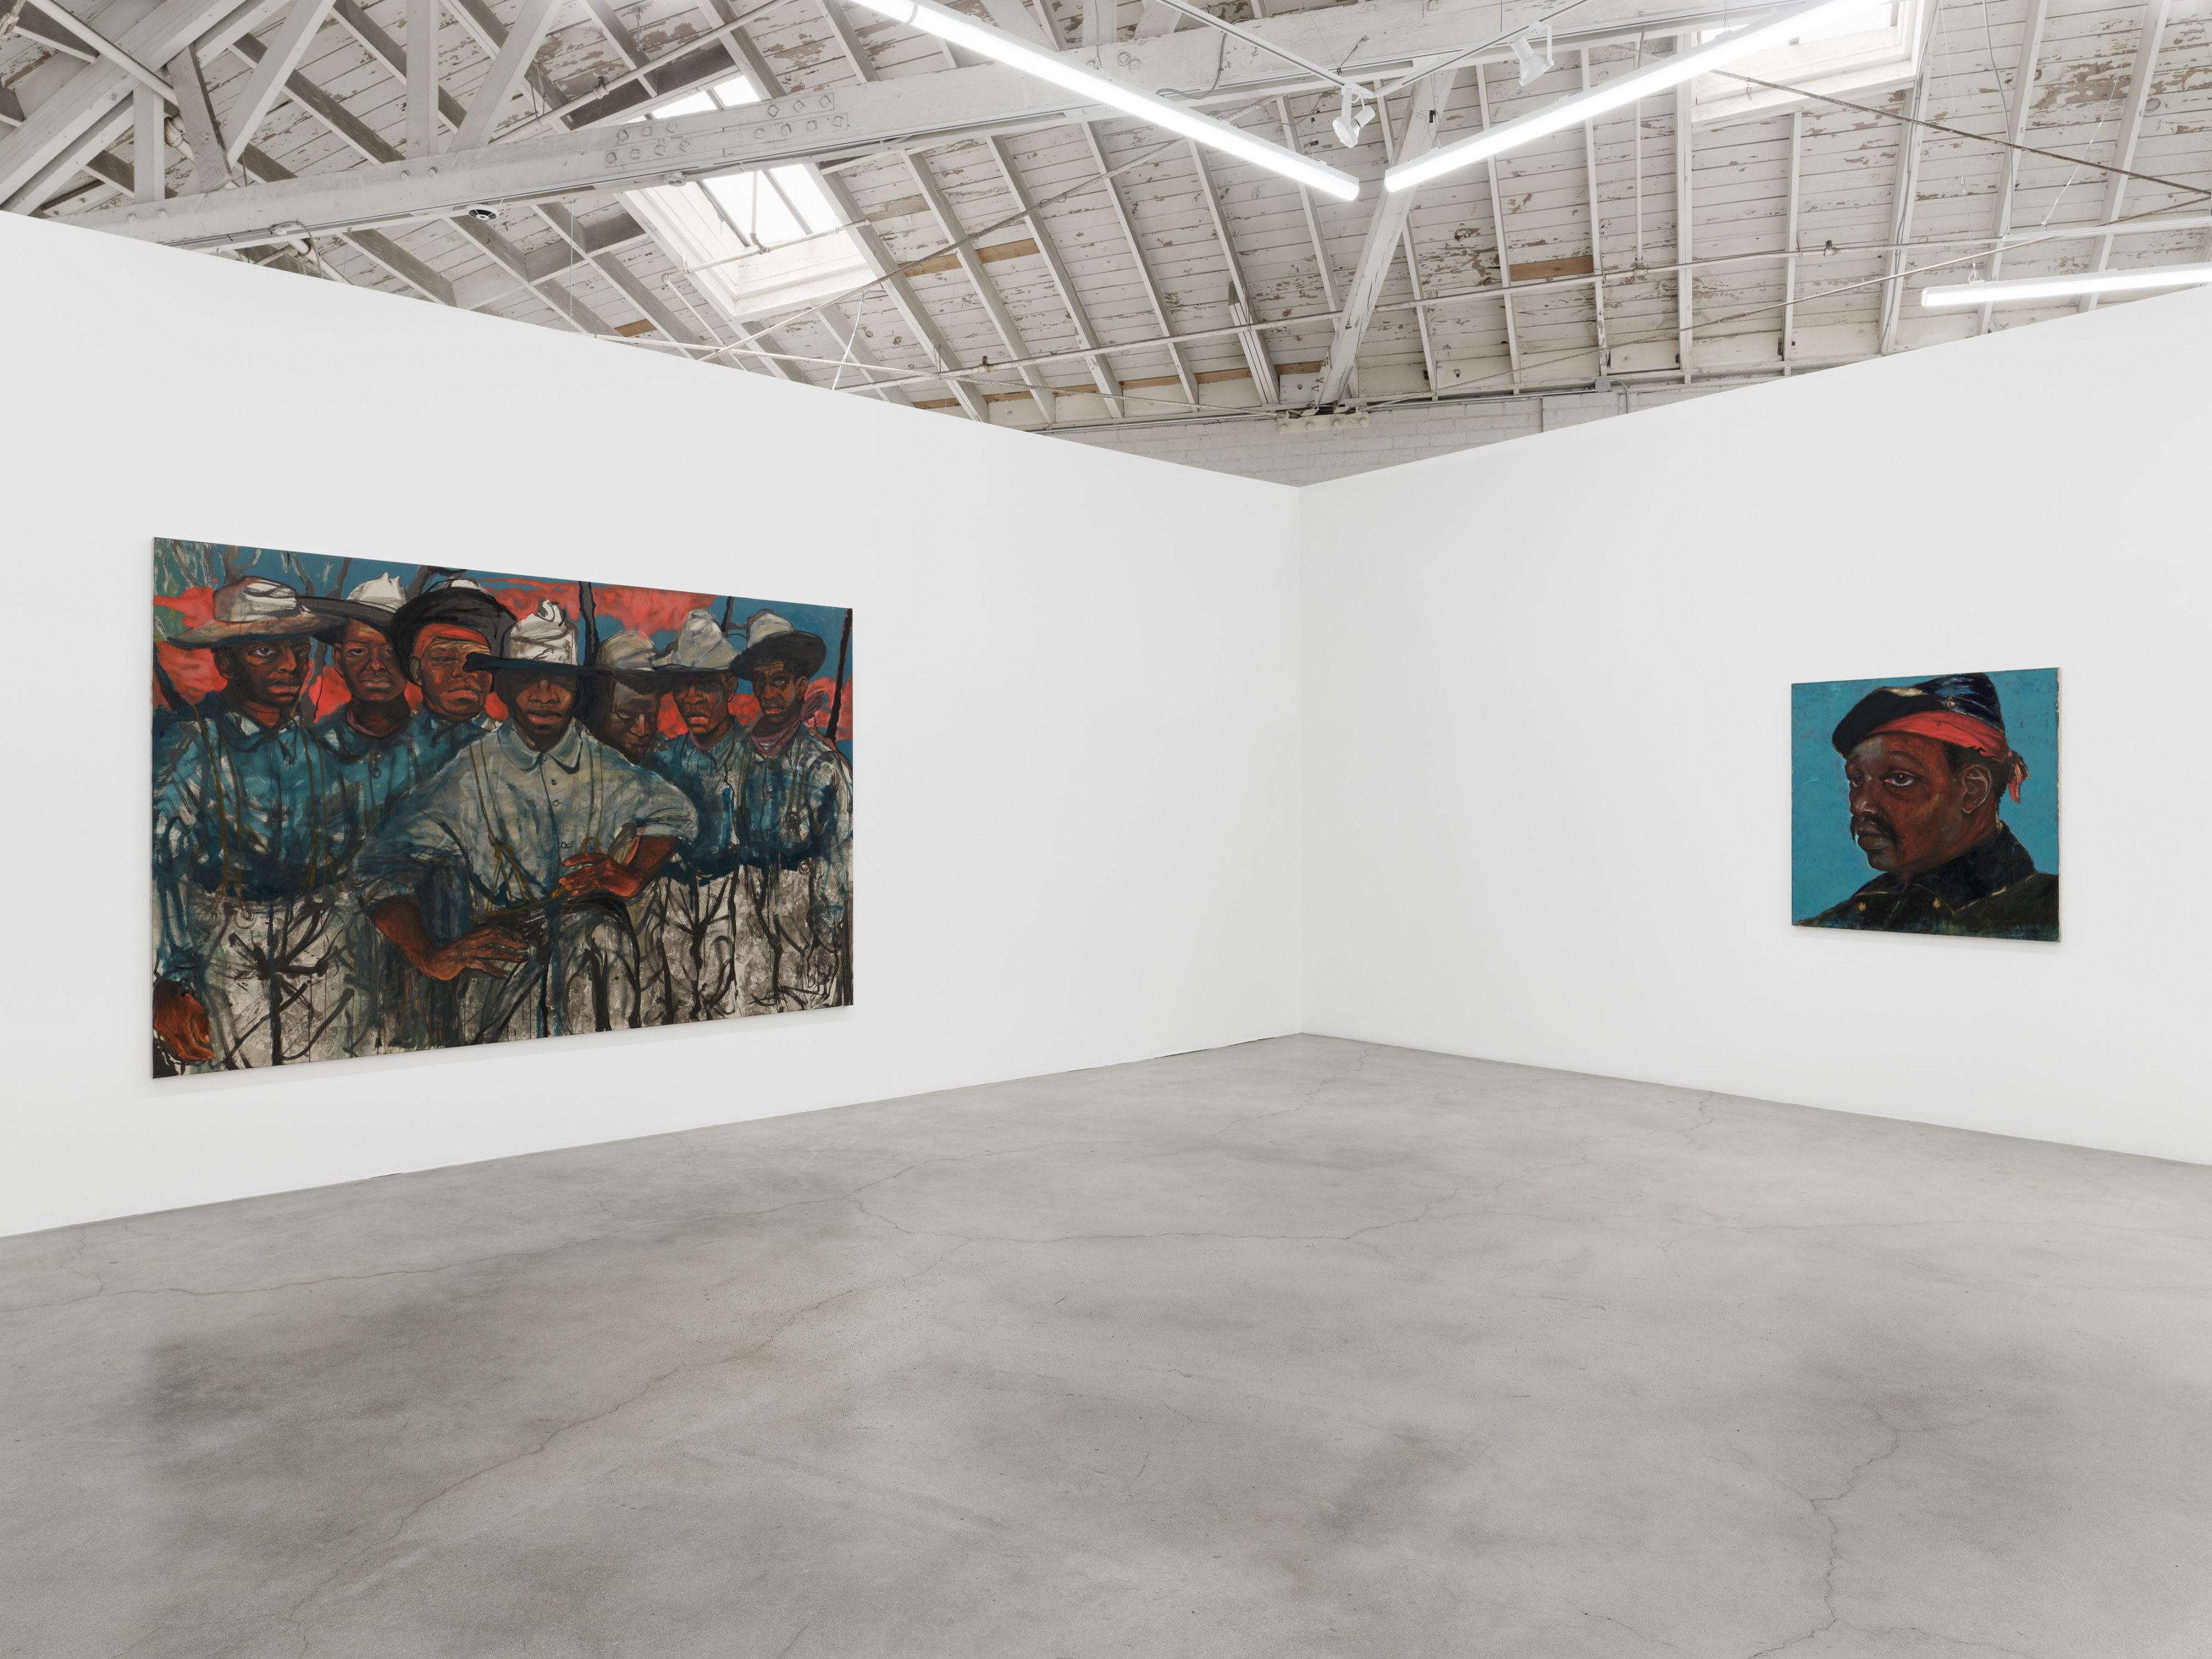 Chaz Guest, Gaining Pride with Promises Broken, installation view, 2022